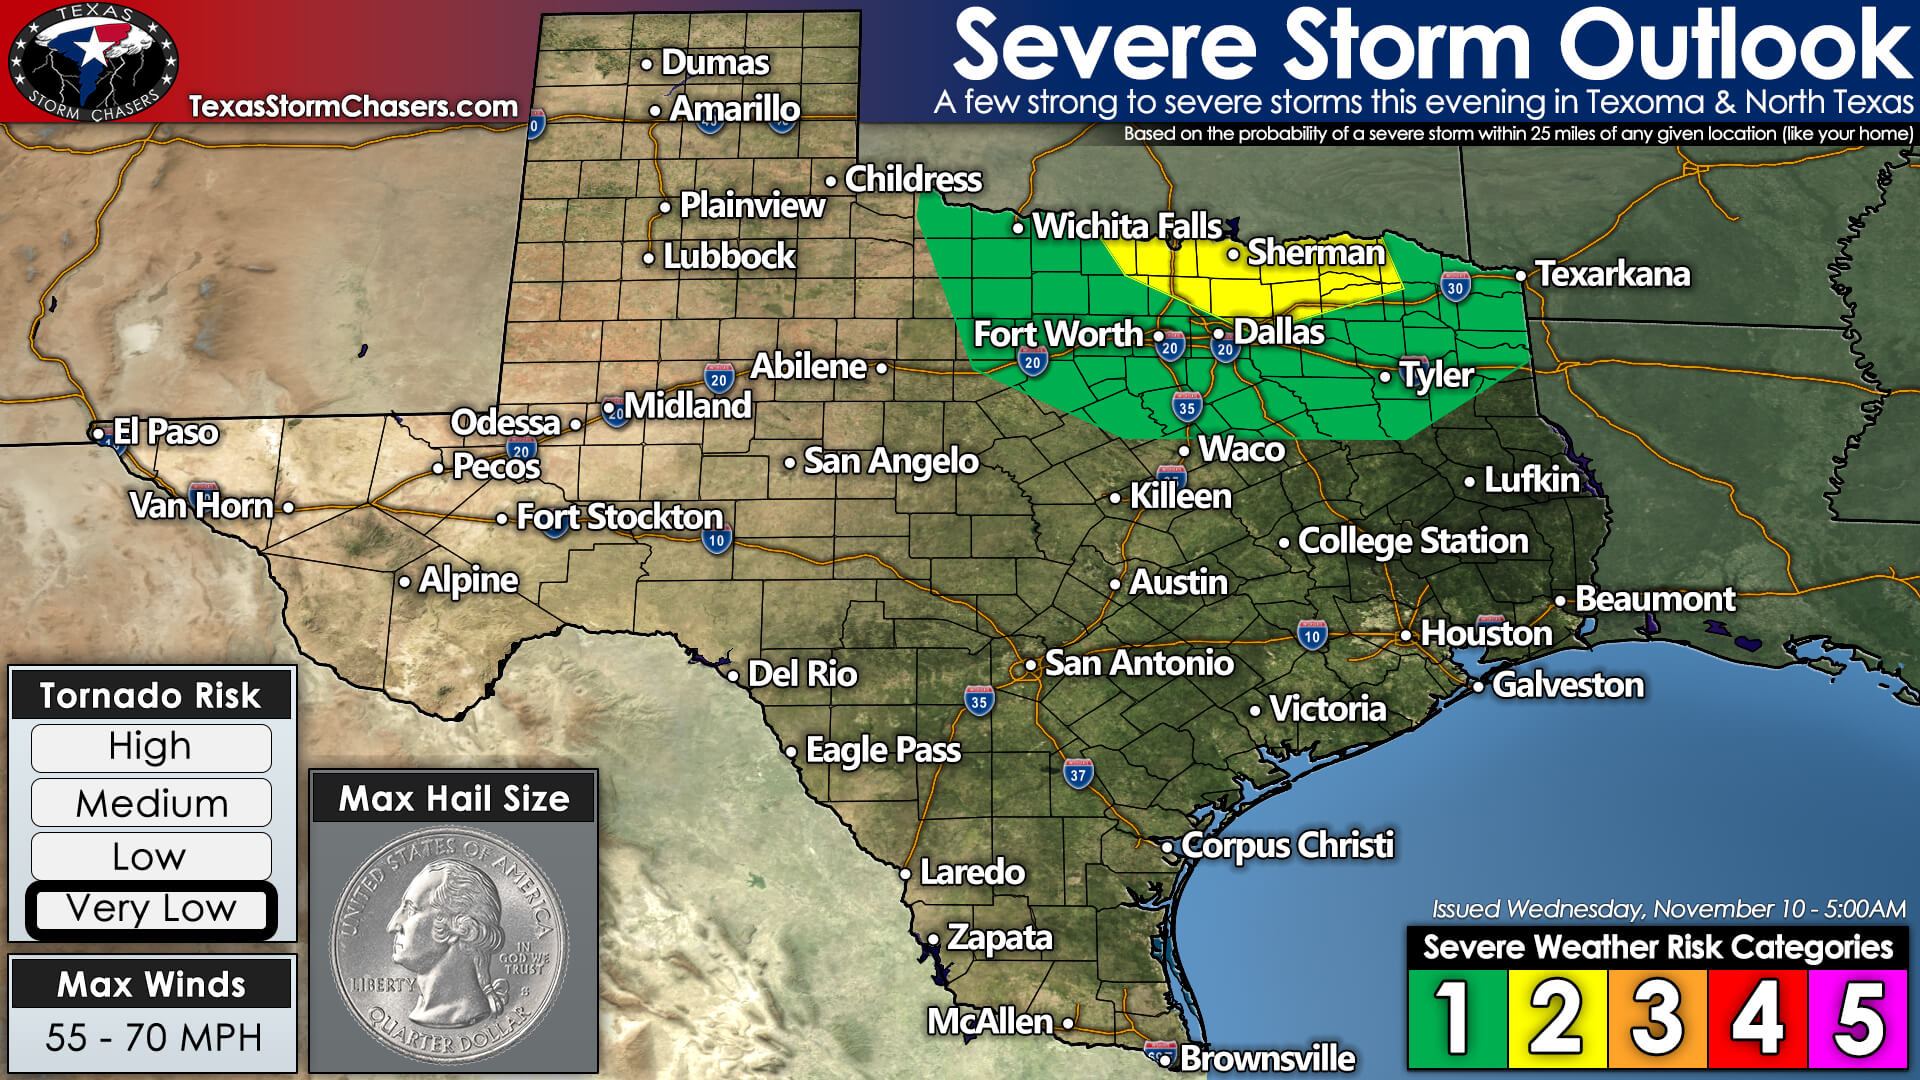 A few severe storms possible tonight in Texoma & North Texas